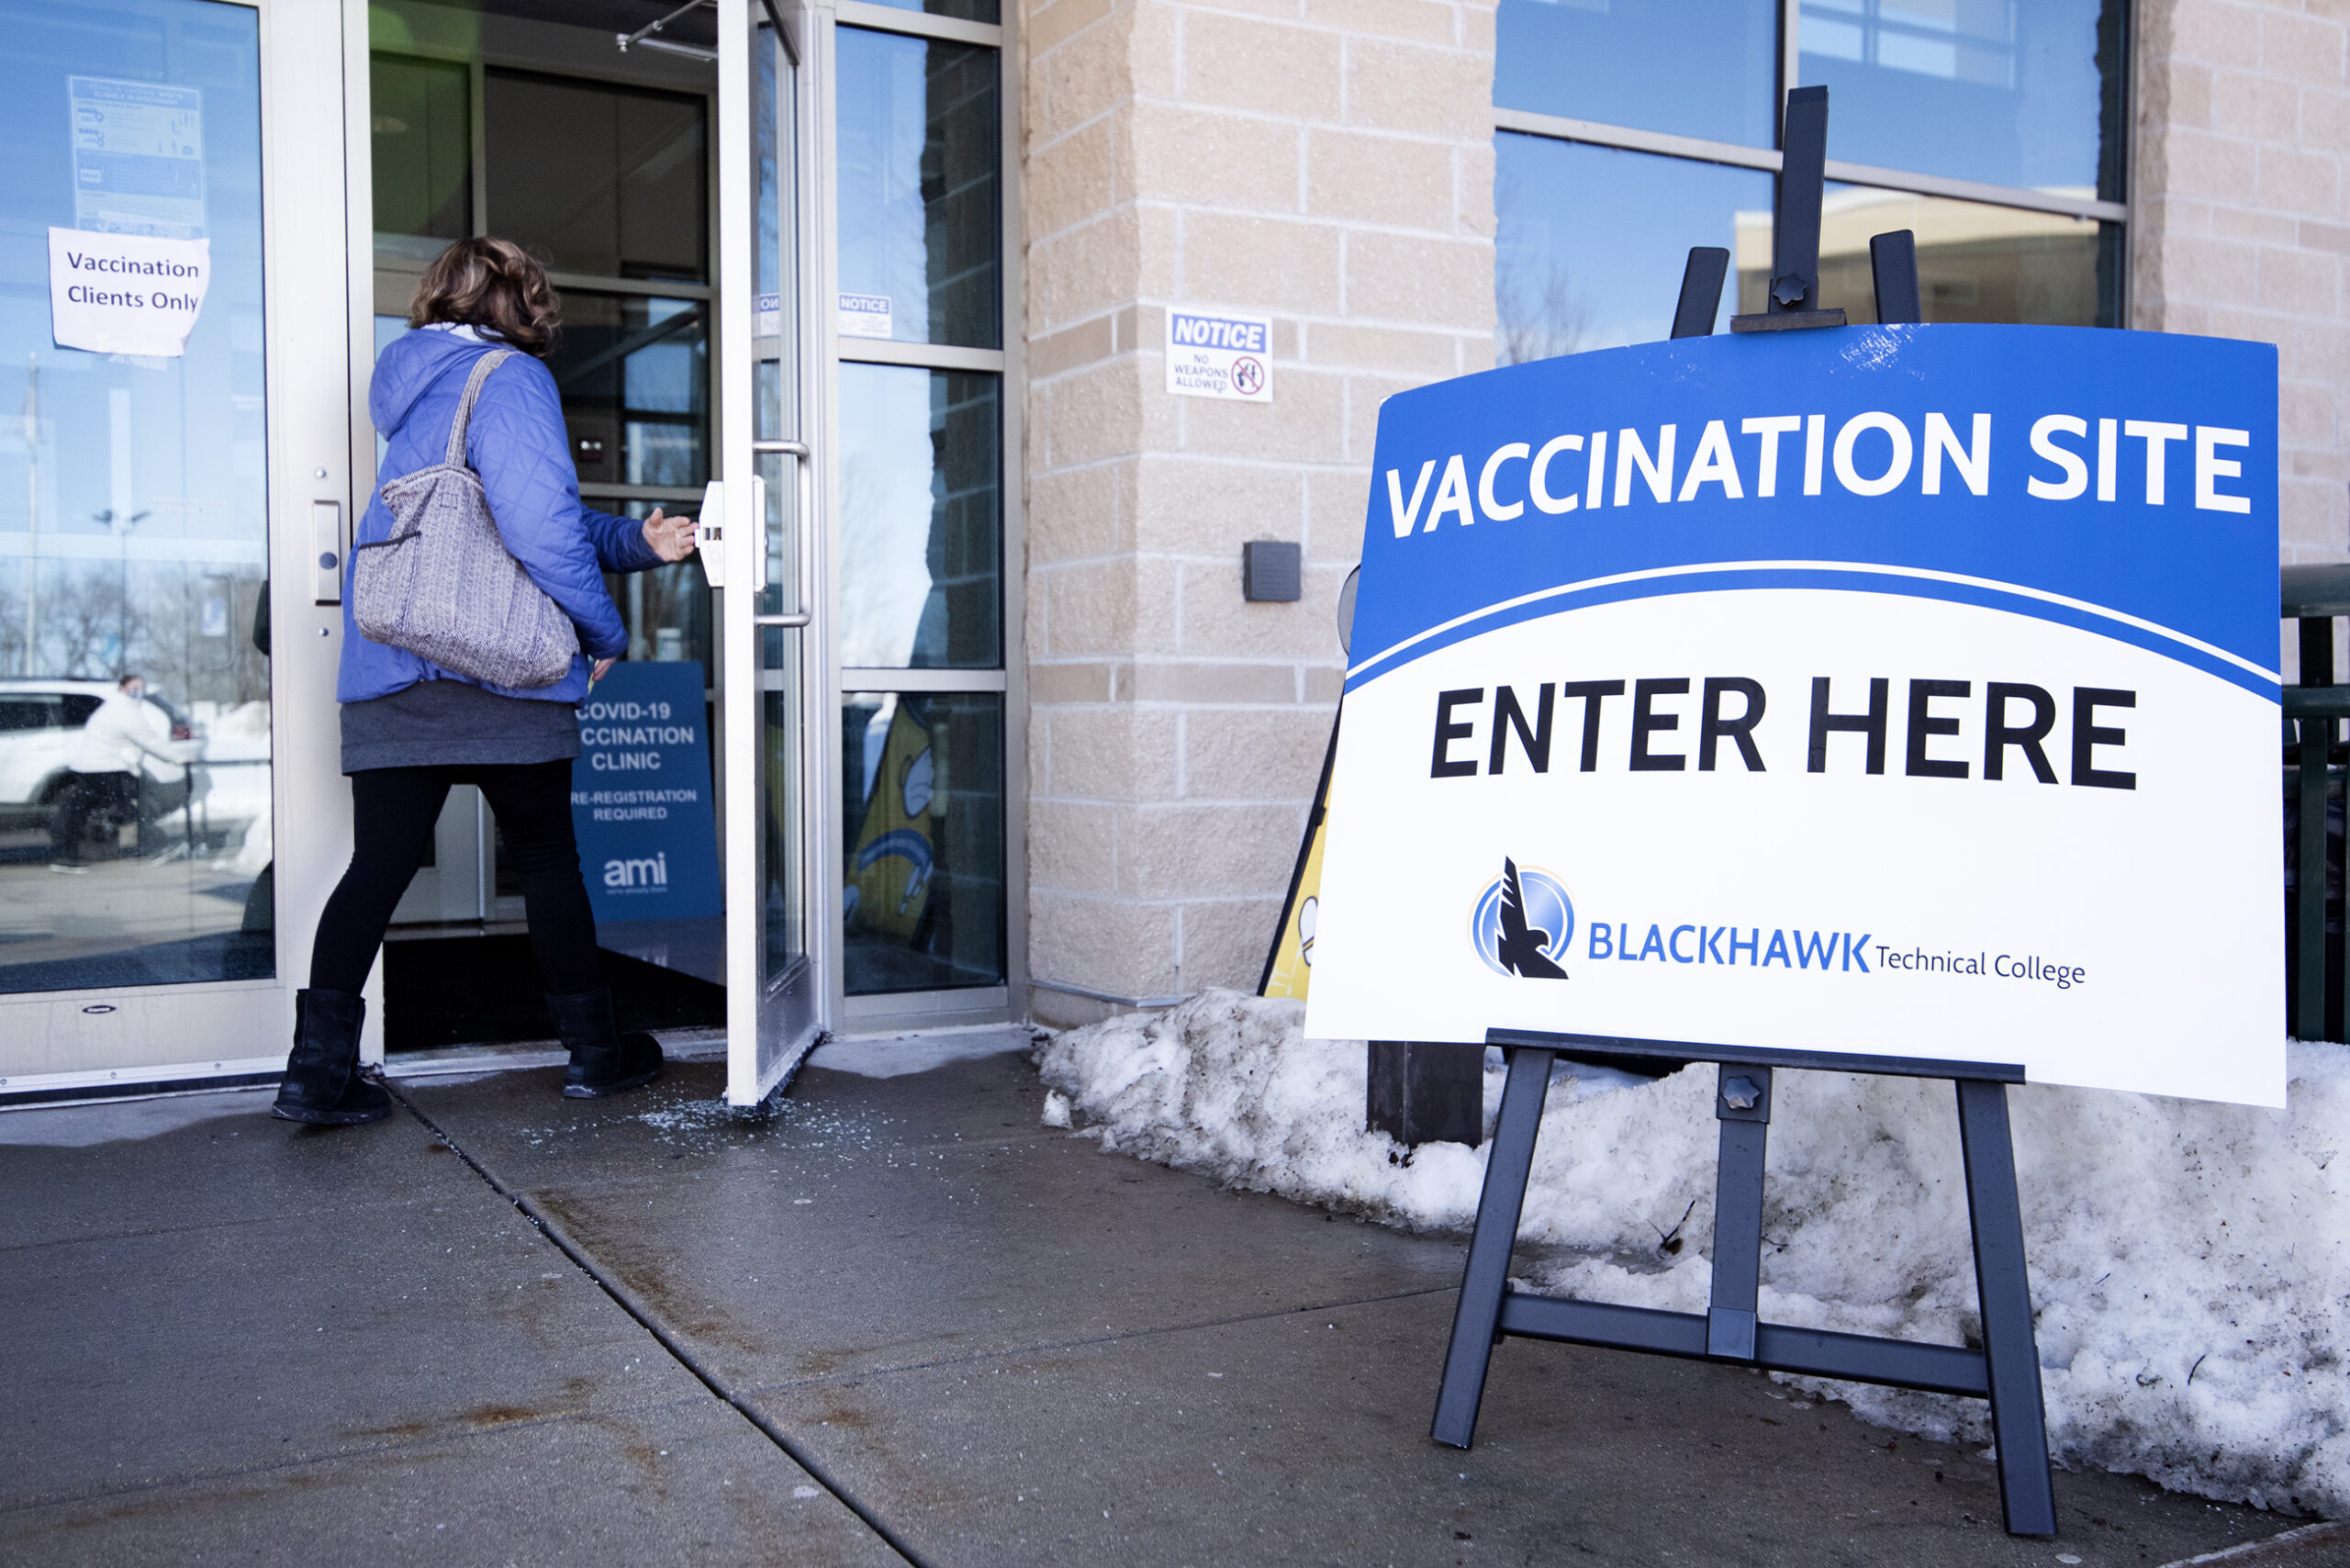 4 New Community-Based COVID-19 Vaccination Clinics To Open In Wisconsin